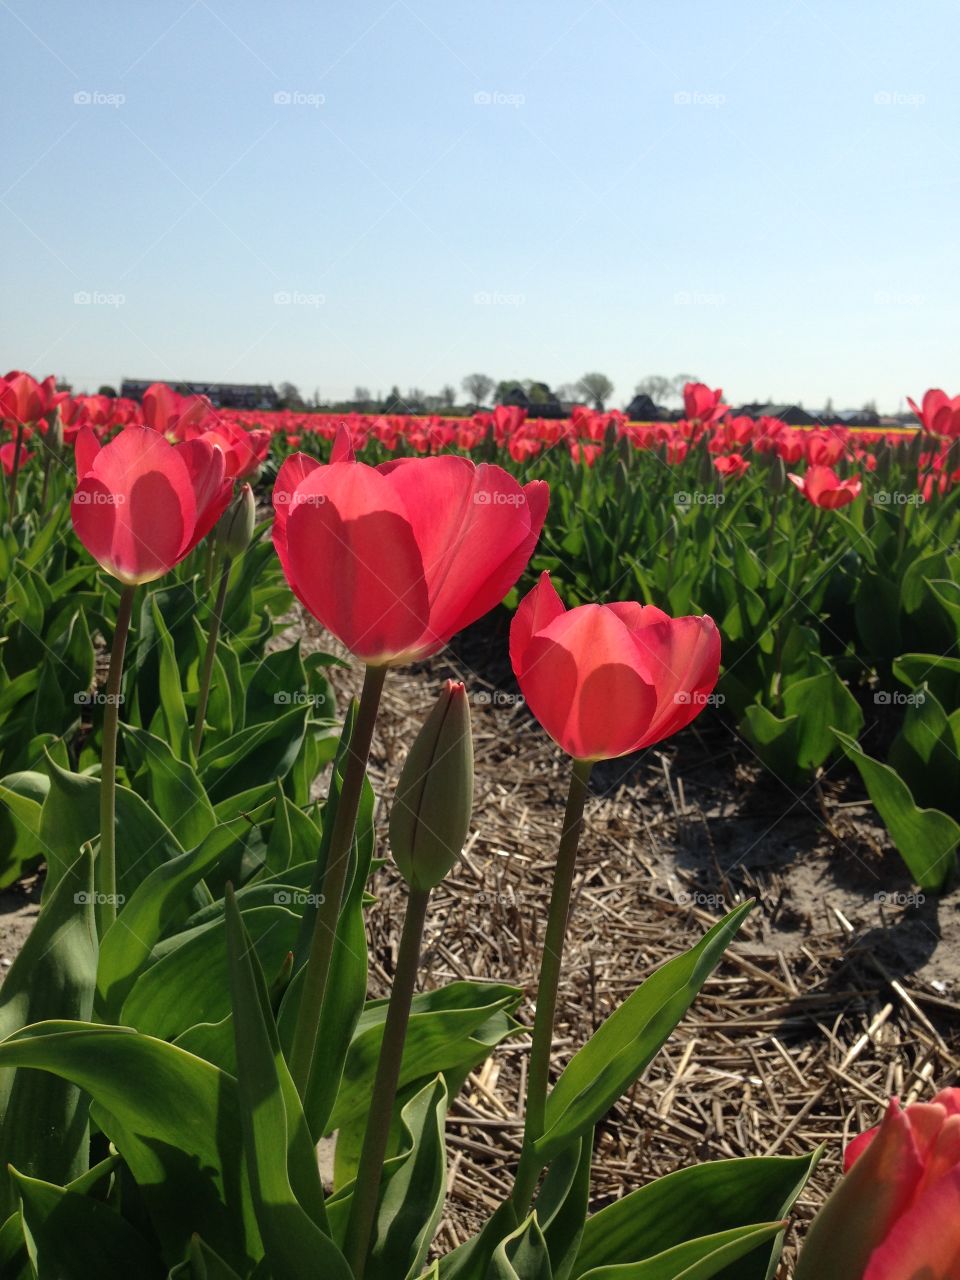 Close up of tree red tulips in a field of blooming tulips. Spring in The Netherlands.